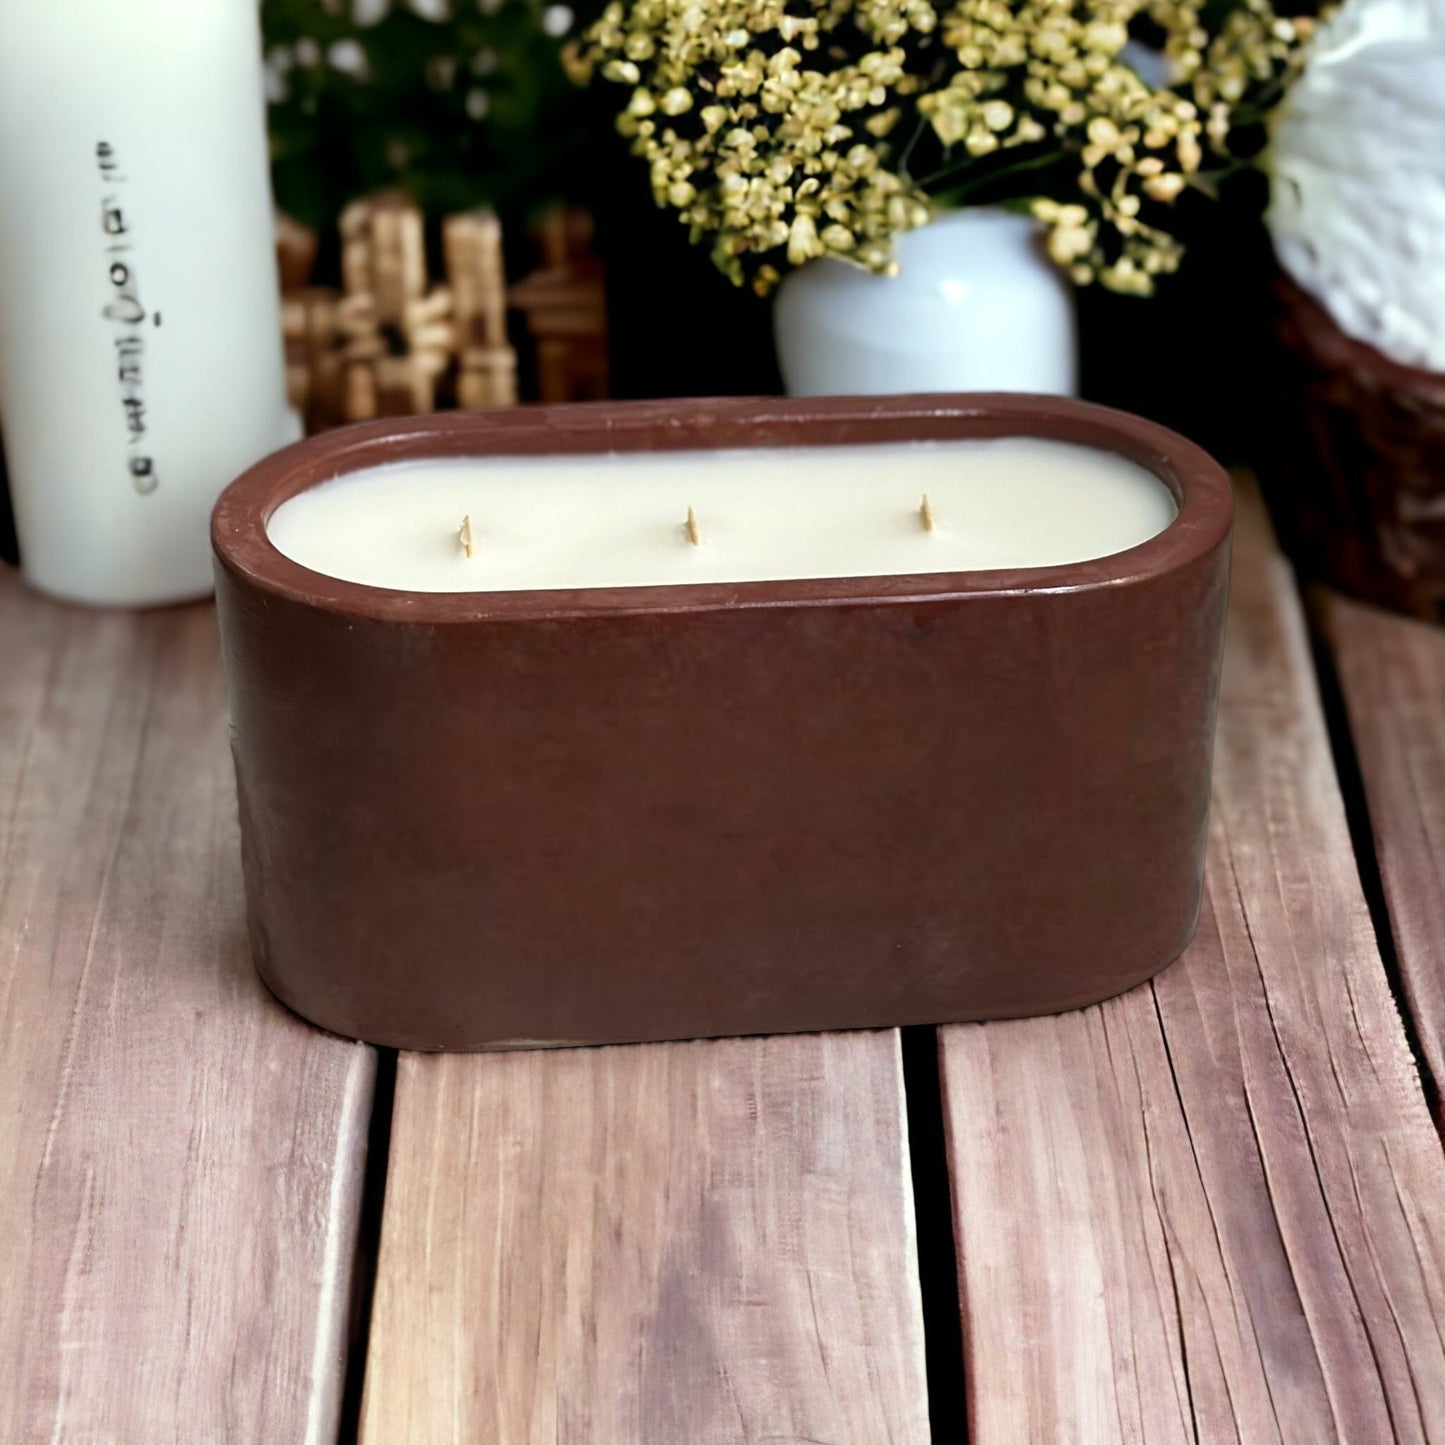 3-Wick 12 oz Candle